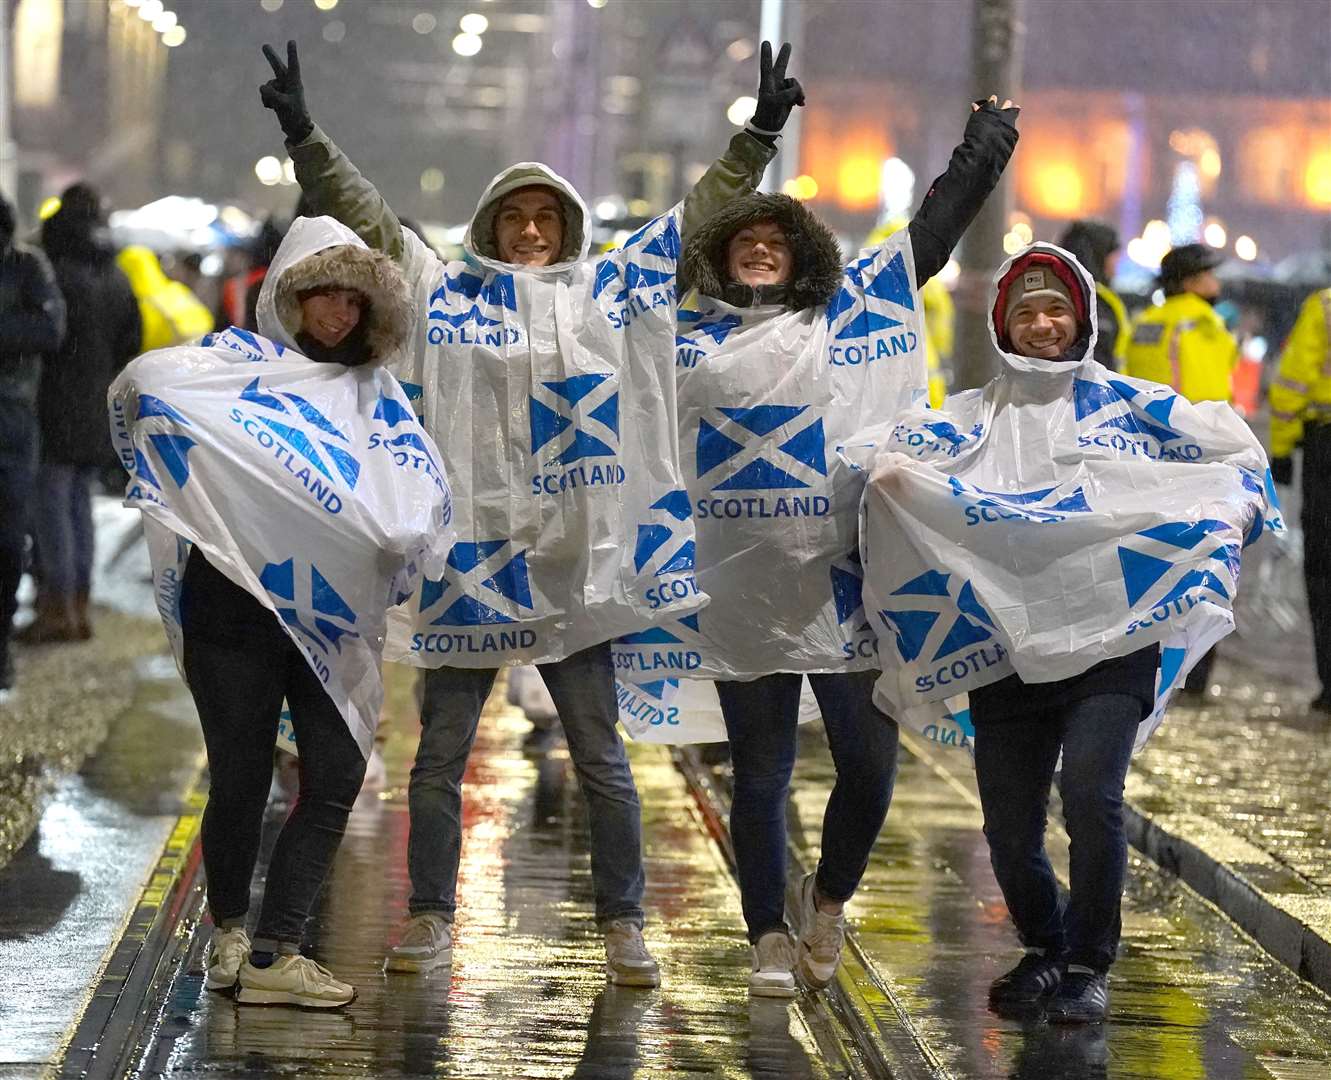 Hogmanay revellers dressed for the weather in Edinburgh (Andrew Milligan/PA)